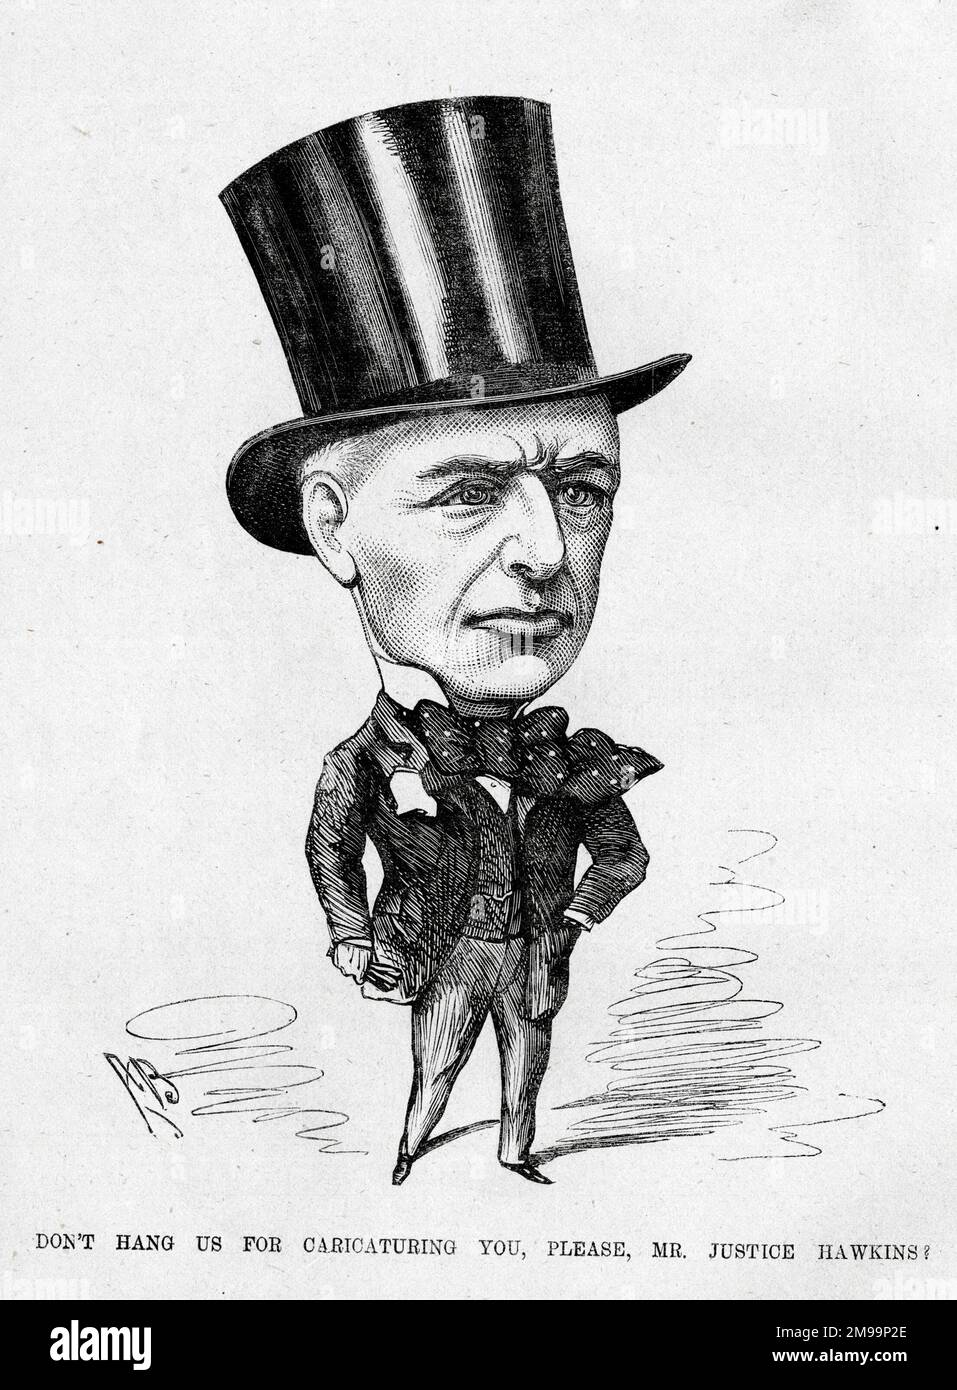 Cartoon portrait of Justice Henry Hawkins. Don't hang us for caricaturing you, please, Mr Justice Hawkins! Henry Hawkins, 1st Baron Brampton (1817-1907), English judge in the High Court of Justice between 1876 and 1898, gained a reputation as a hanging judge. Stock Photo